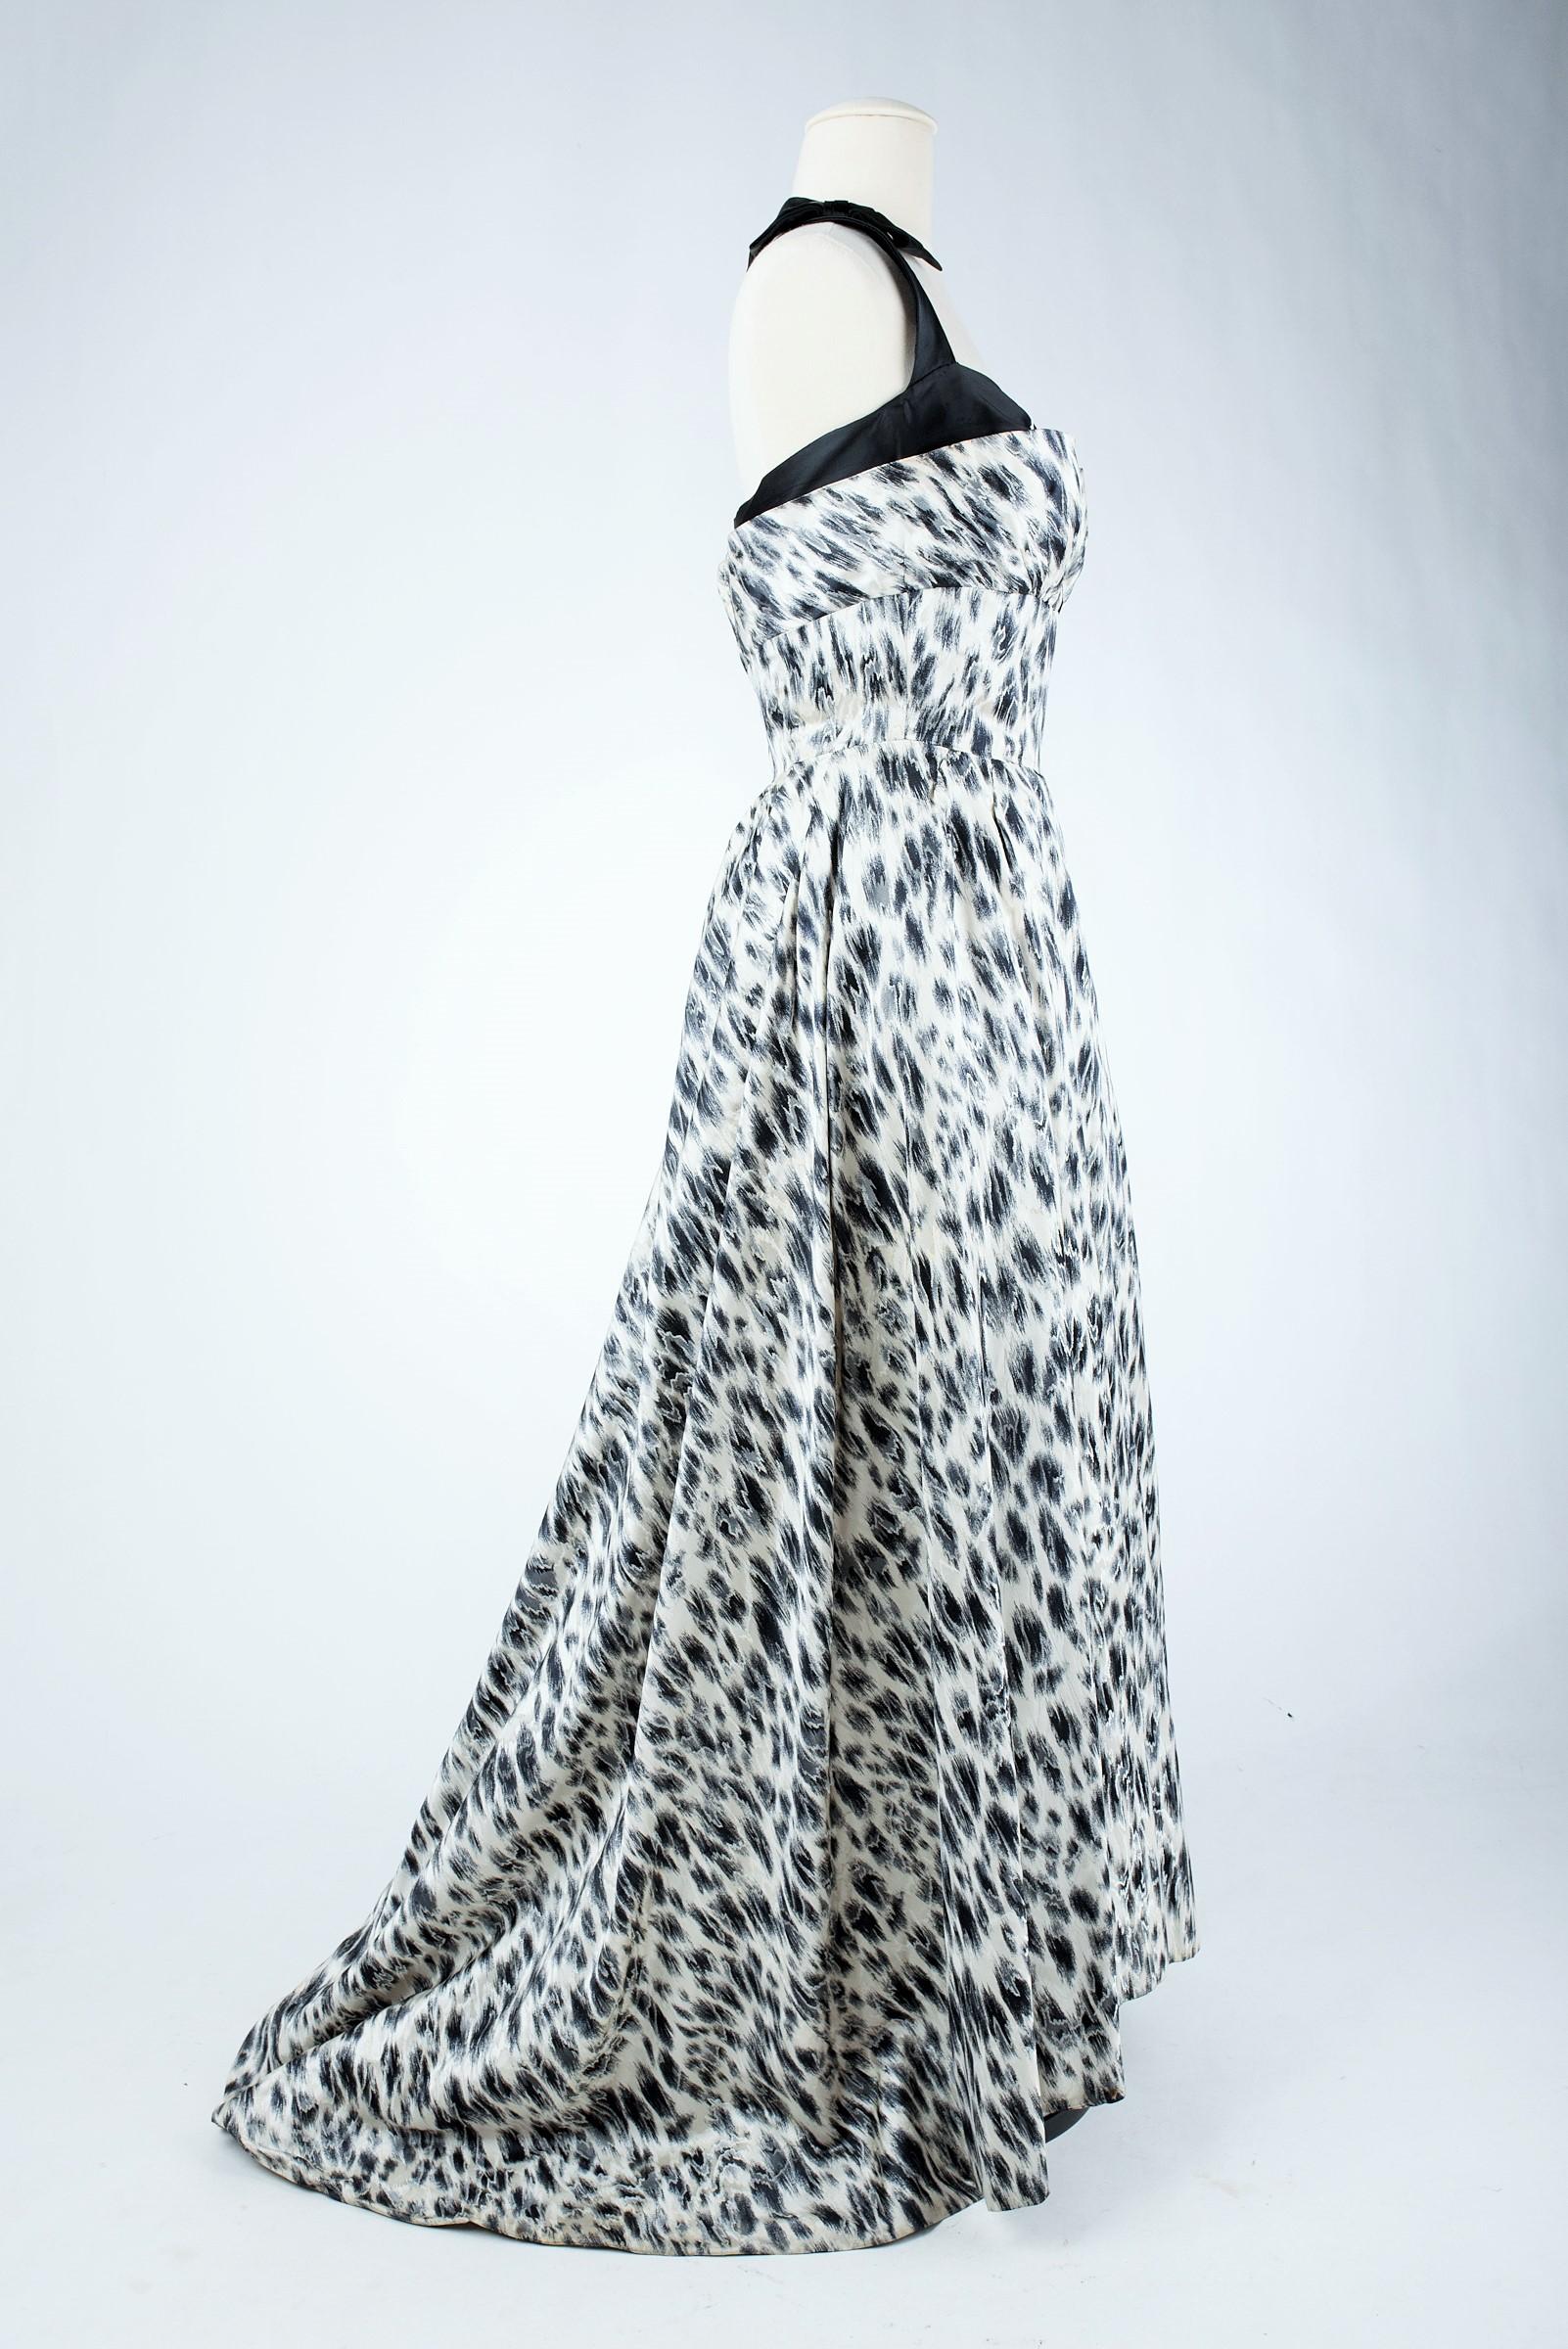 Leopard printed silk Evening Dress by Jacques Fath Haute Couture Circa 1955-1960 For Sale 10